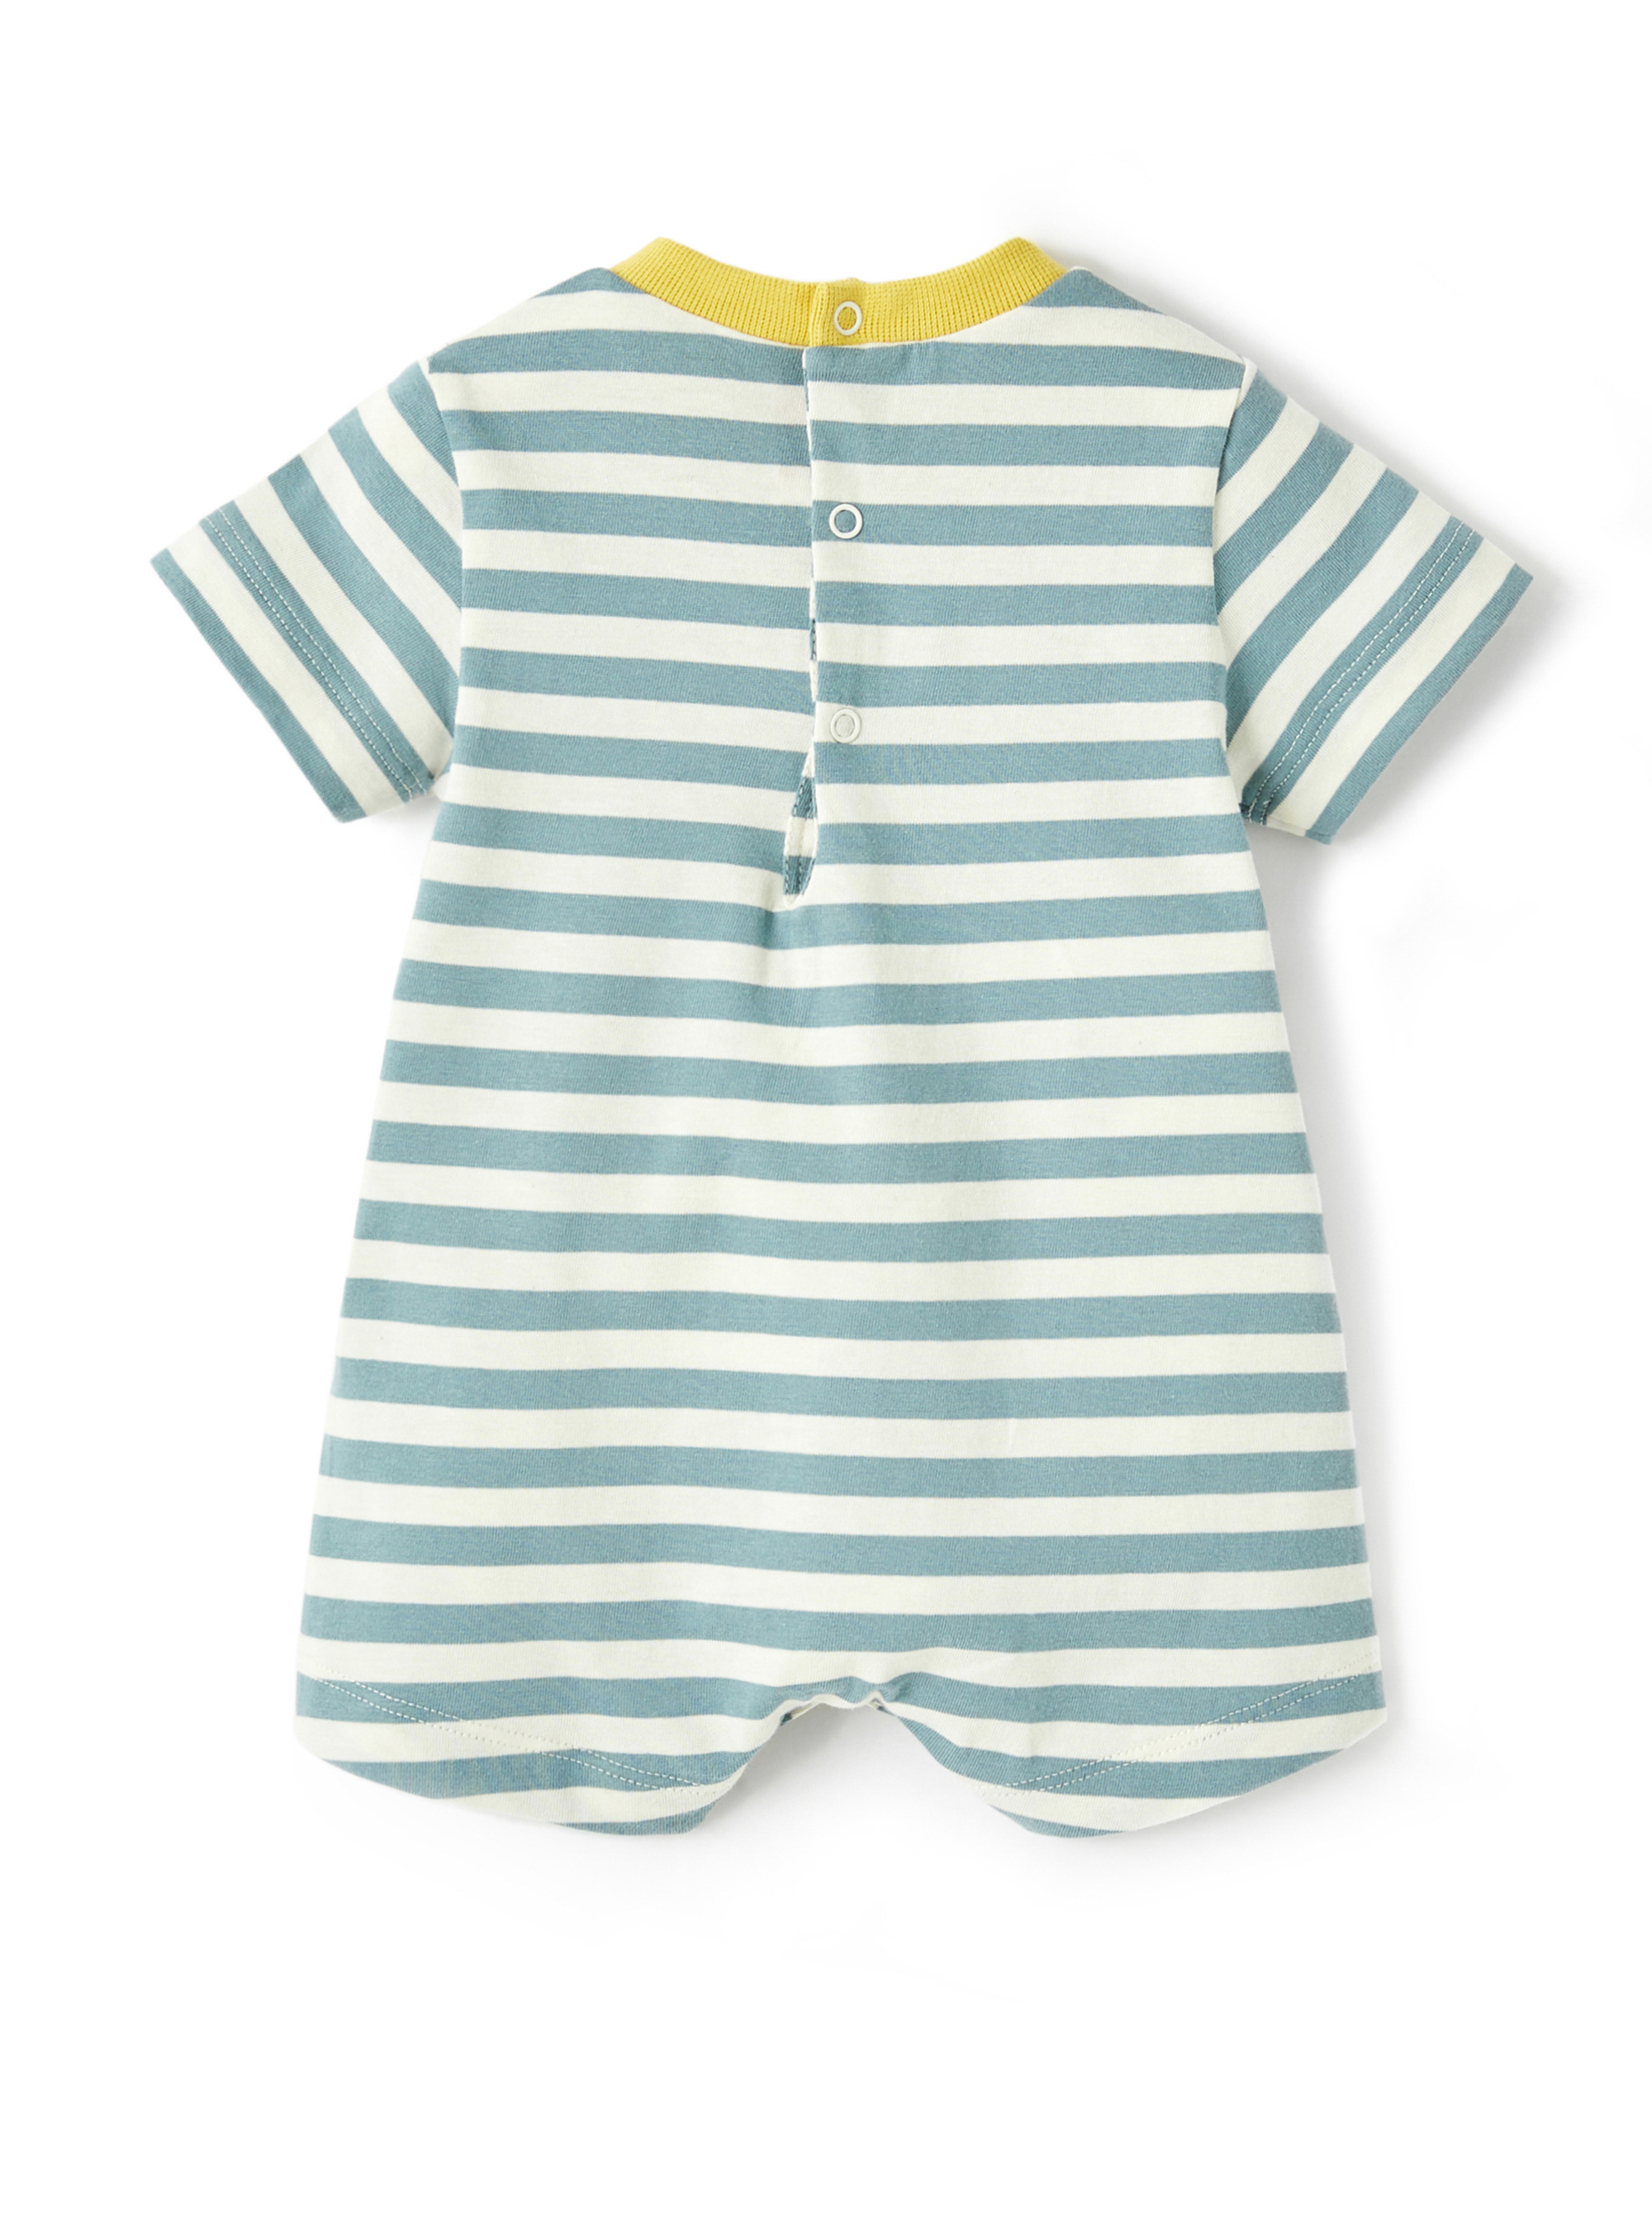 Striped romper with toy cars - Green | Il Gufo